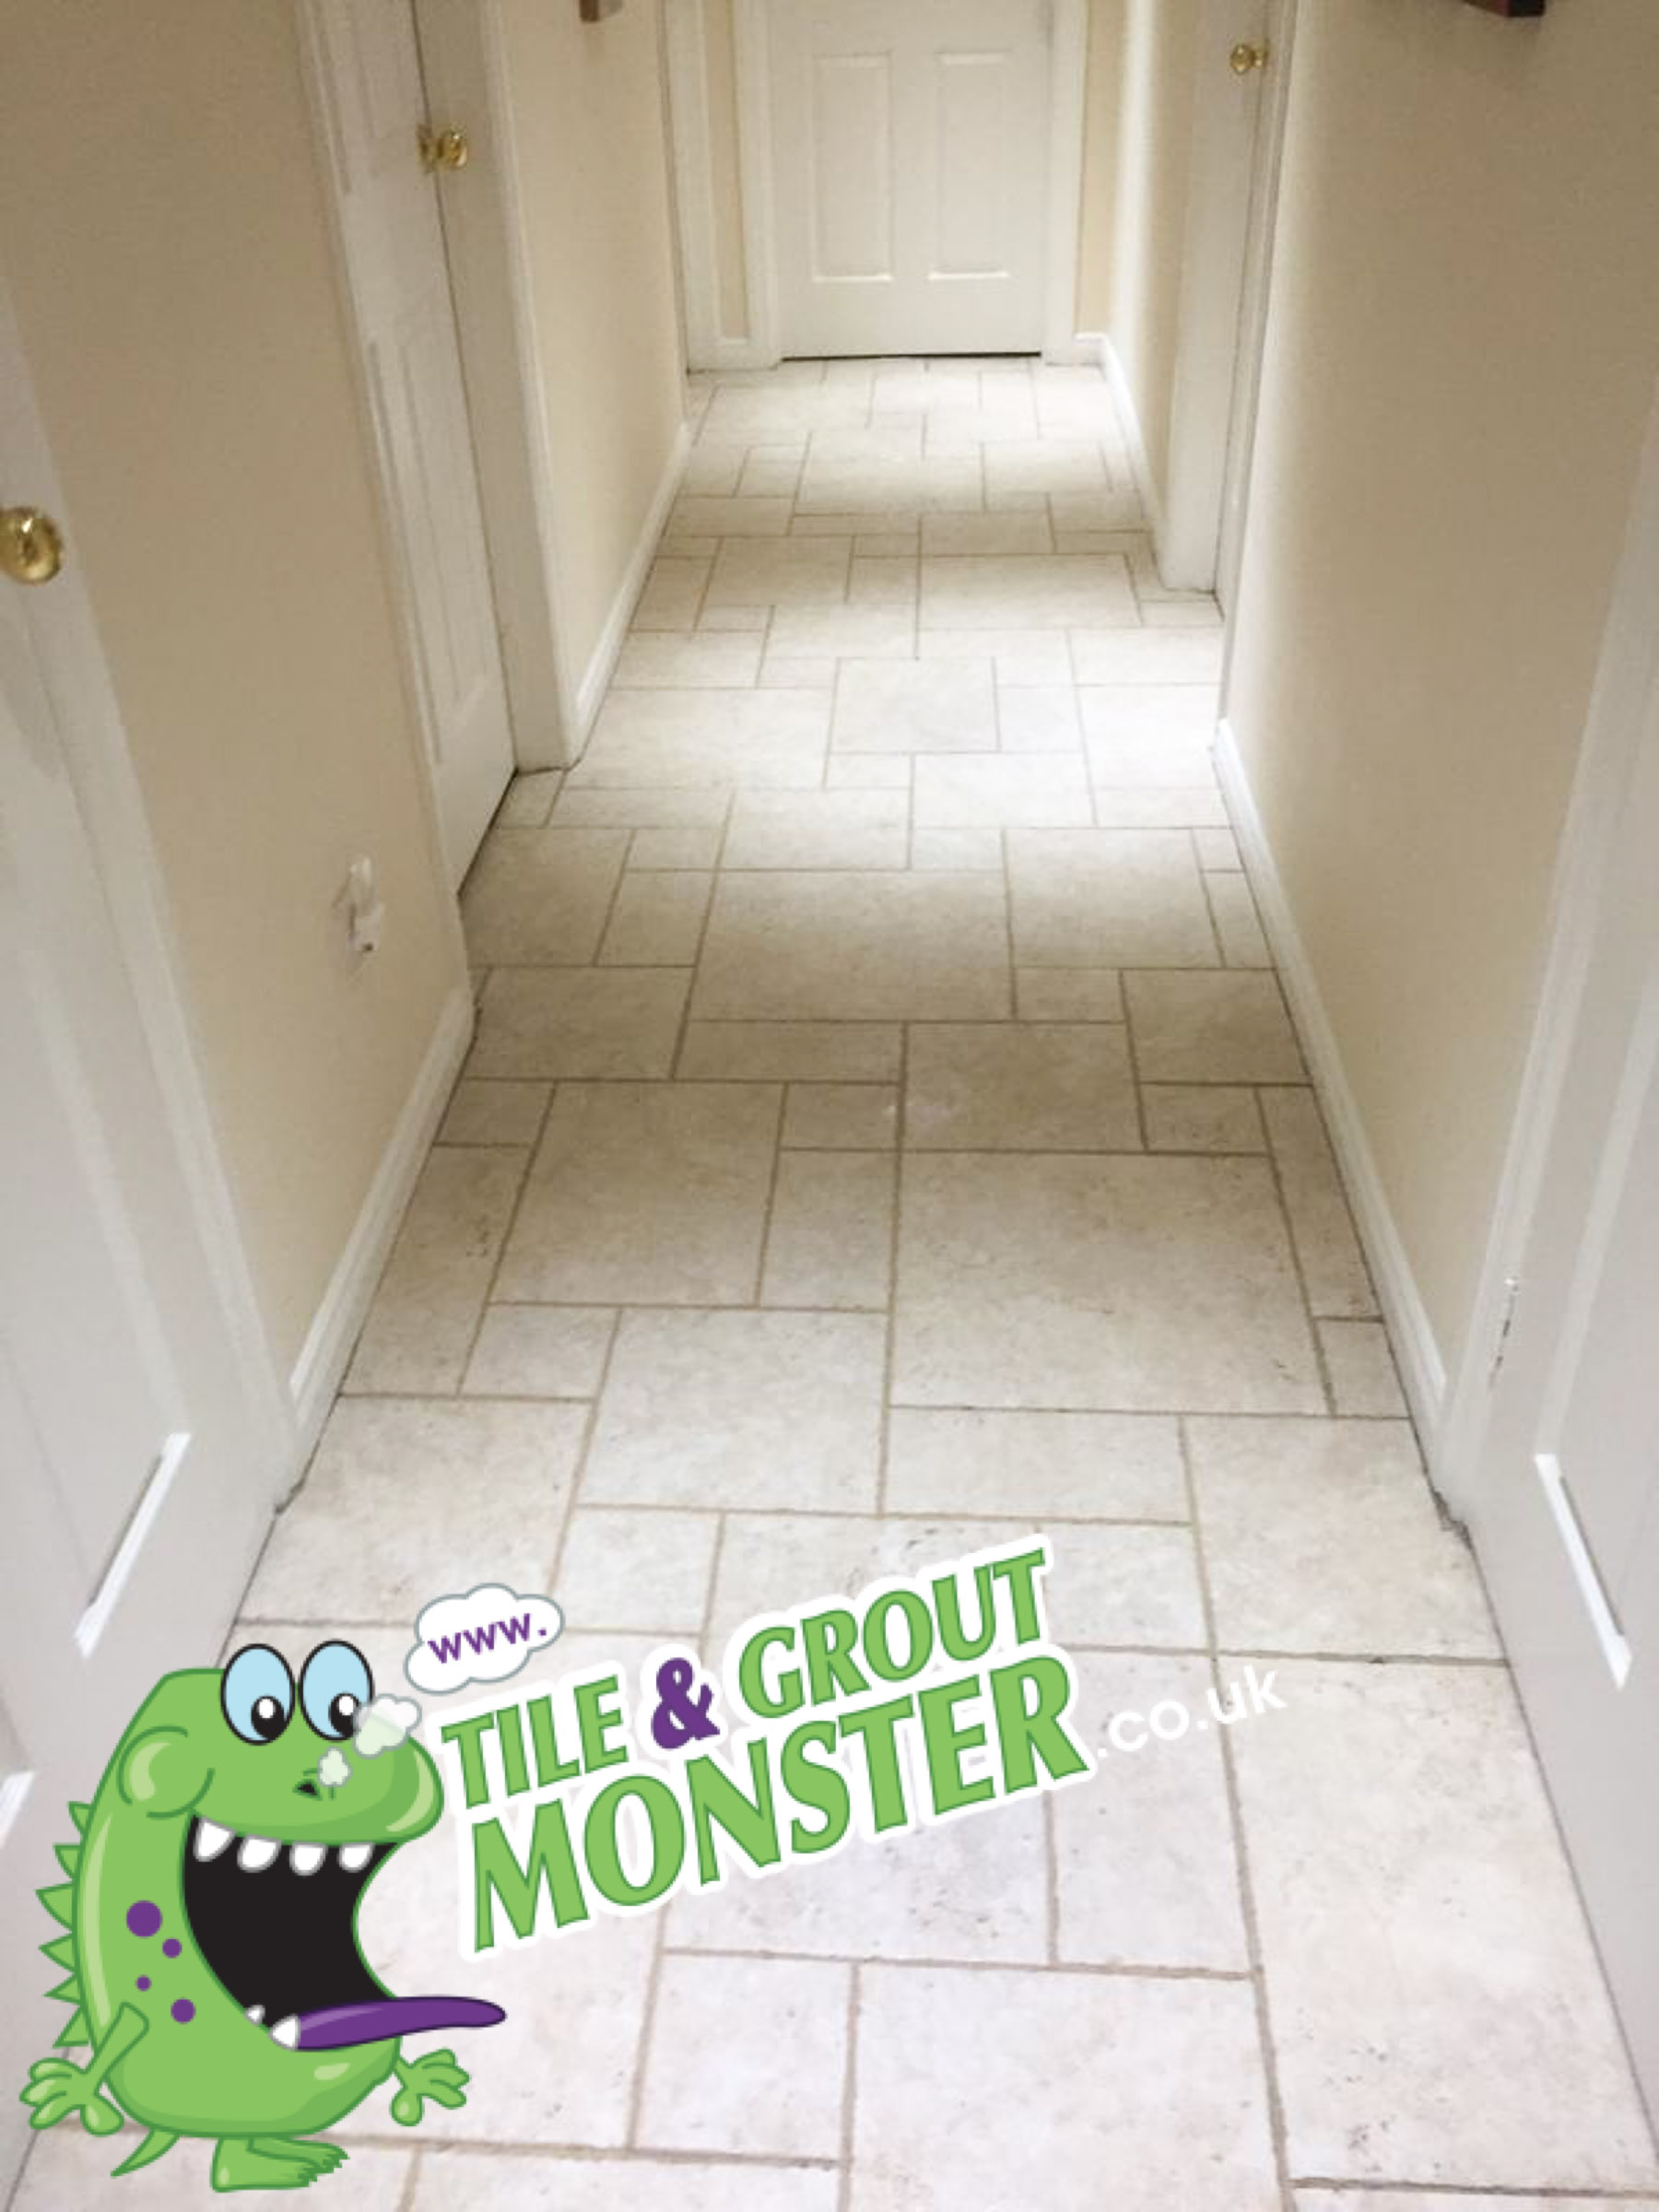 434 Tile And Grout Monster Stone Floor Cleaning Company Belfast